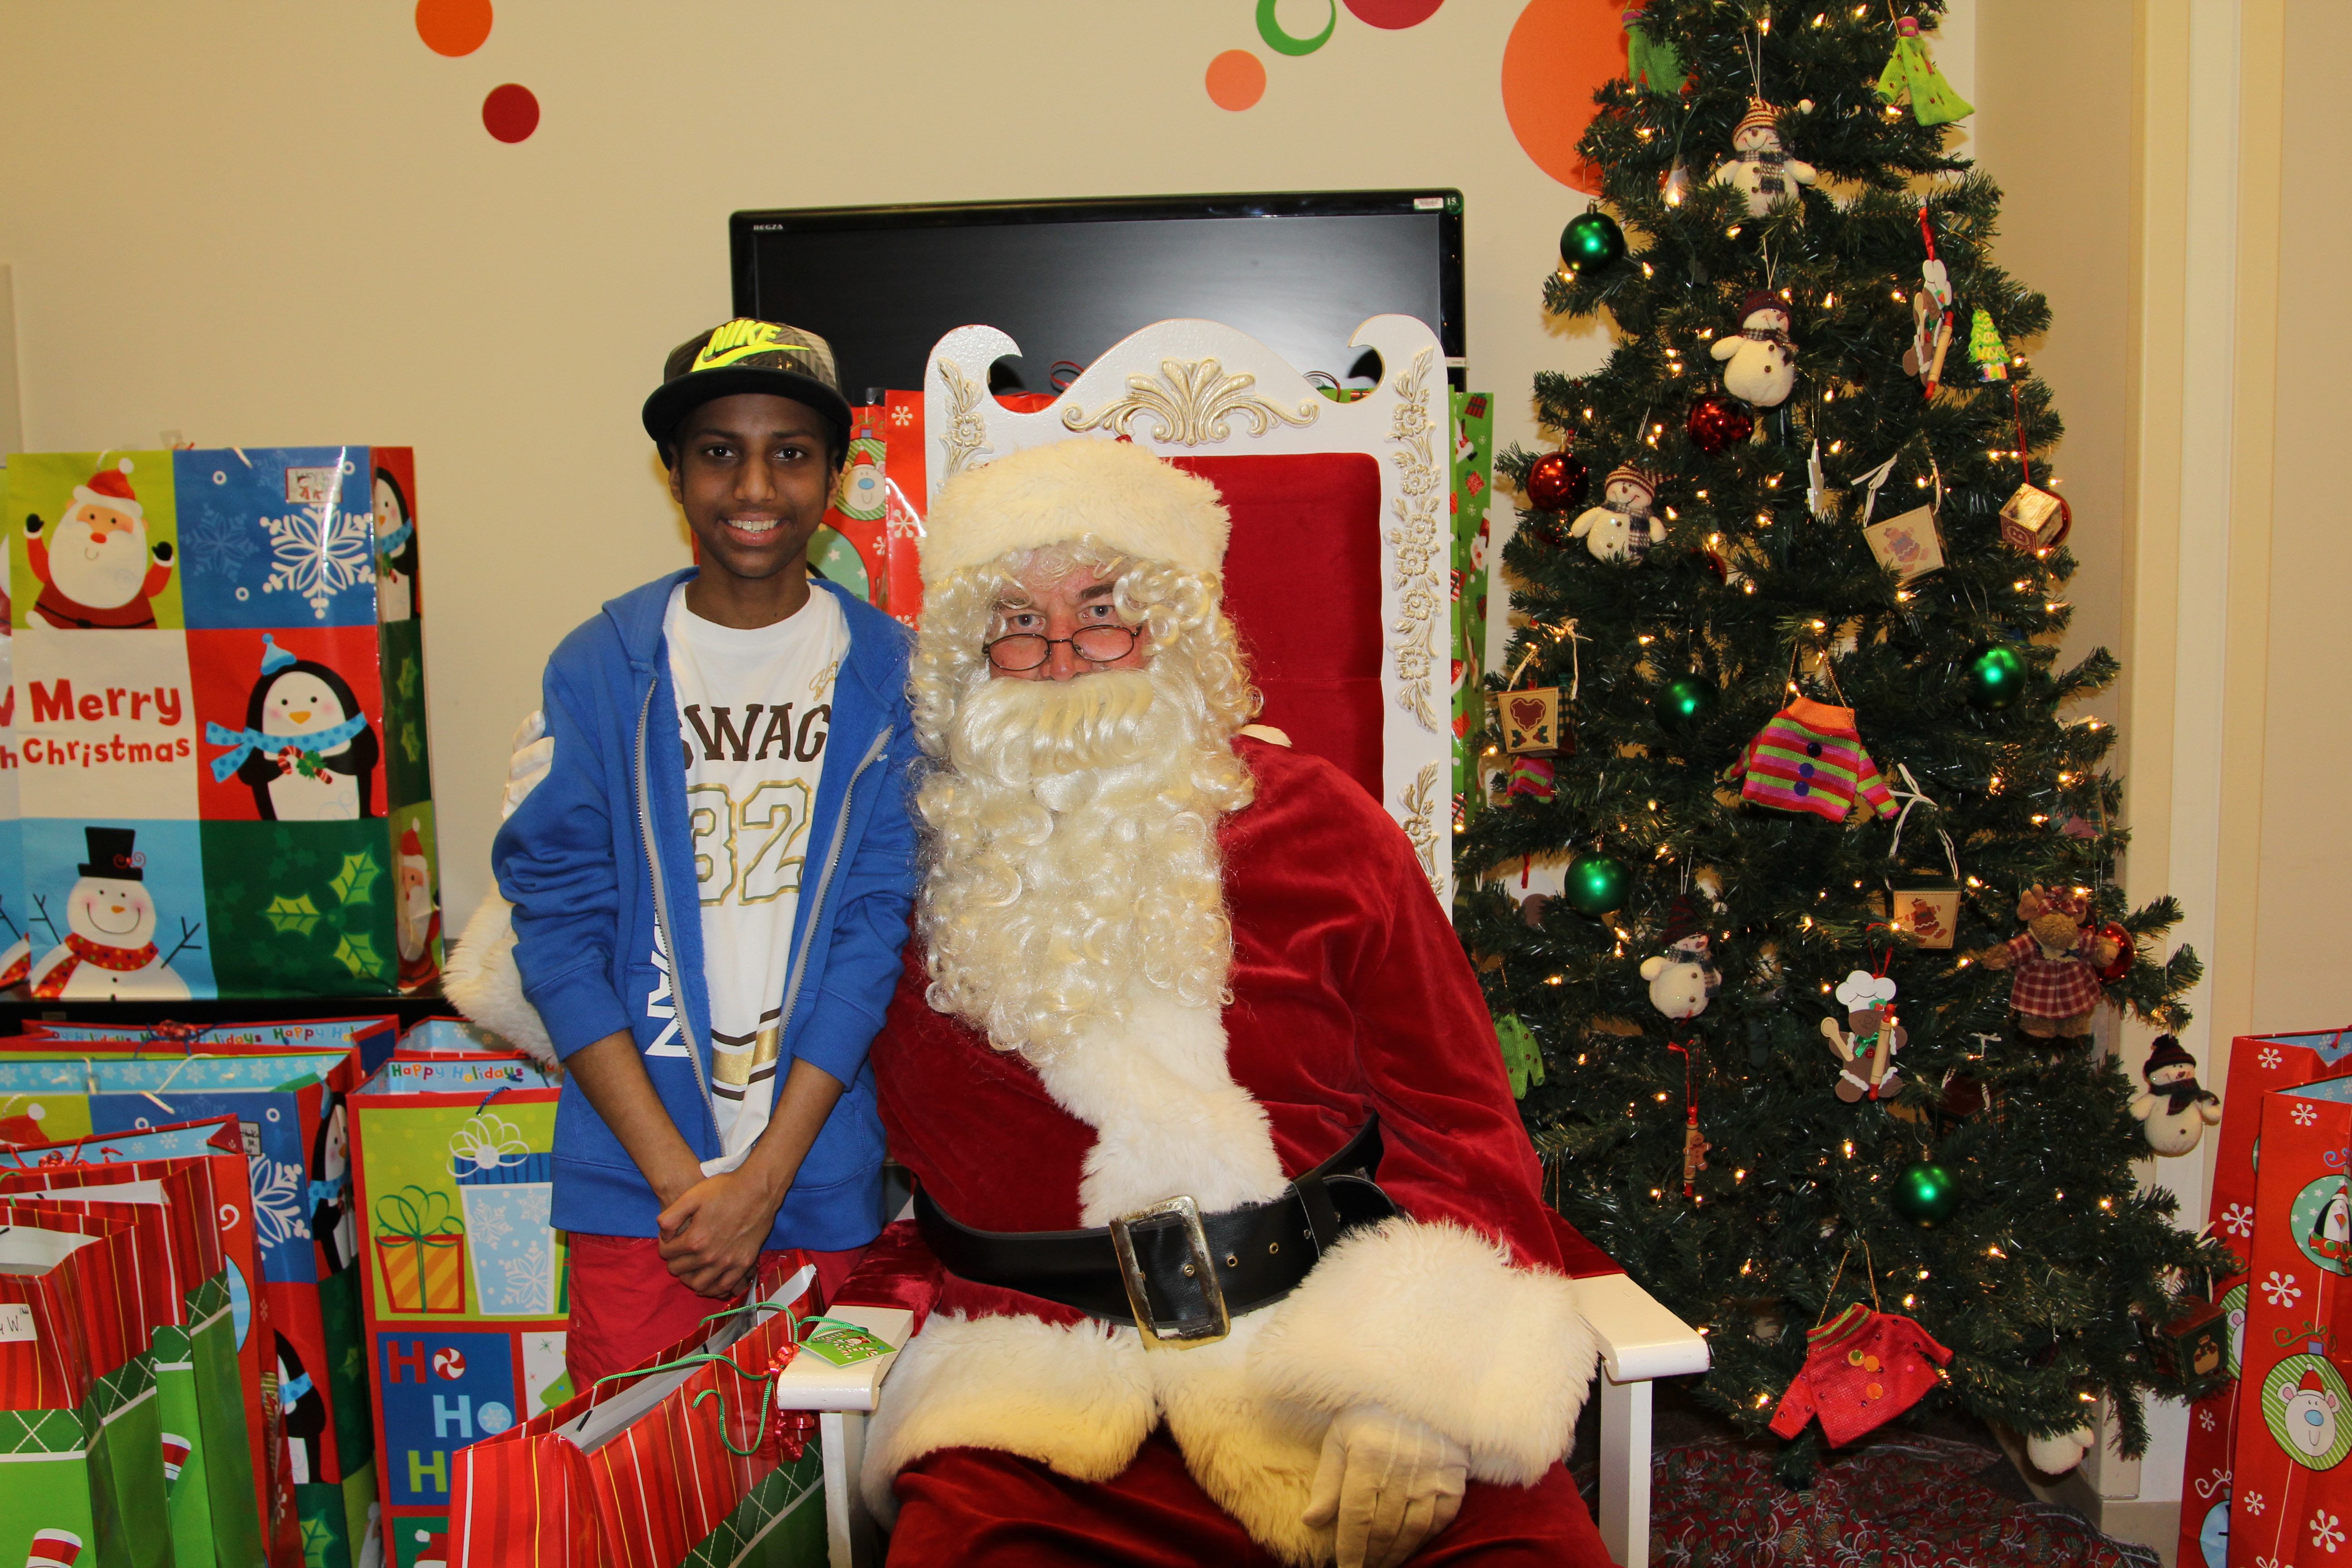 On Dec. 15, 2015, pediatric patients, such as Dhruv, received a warm welcome from Santa.